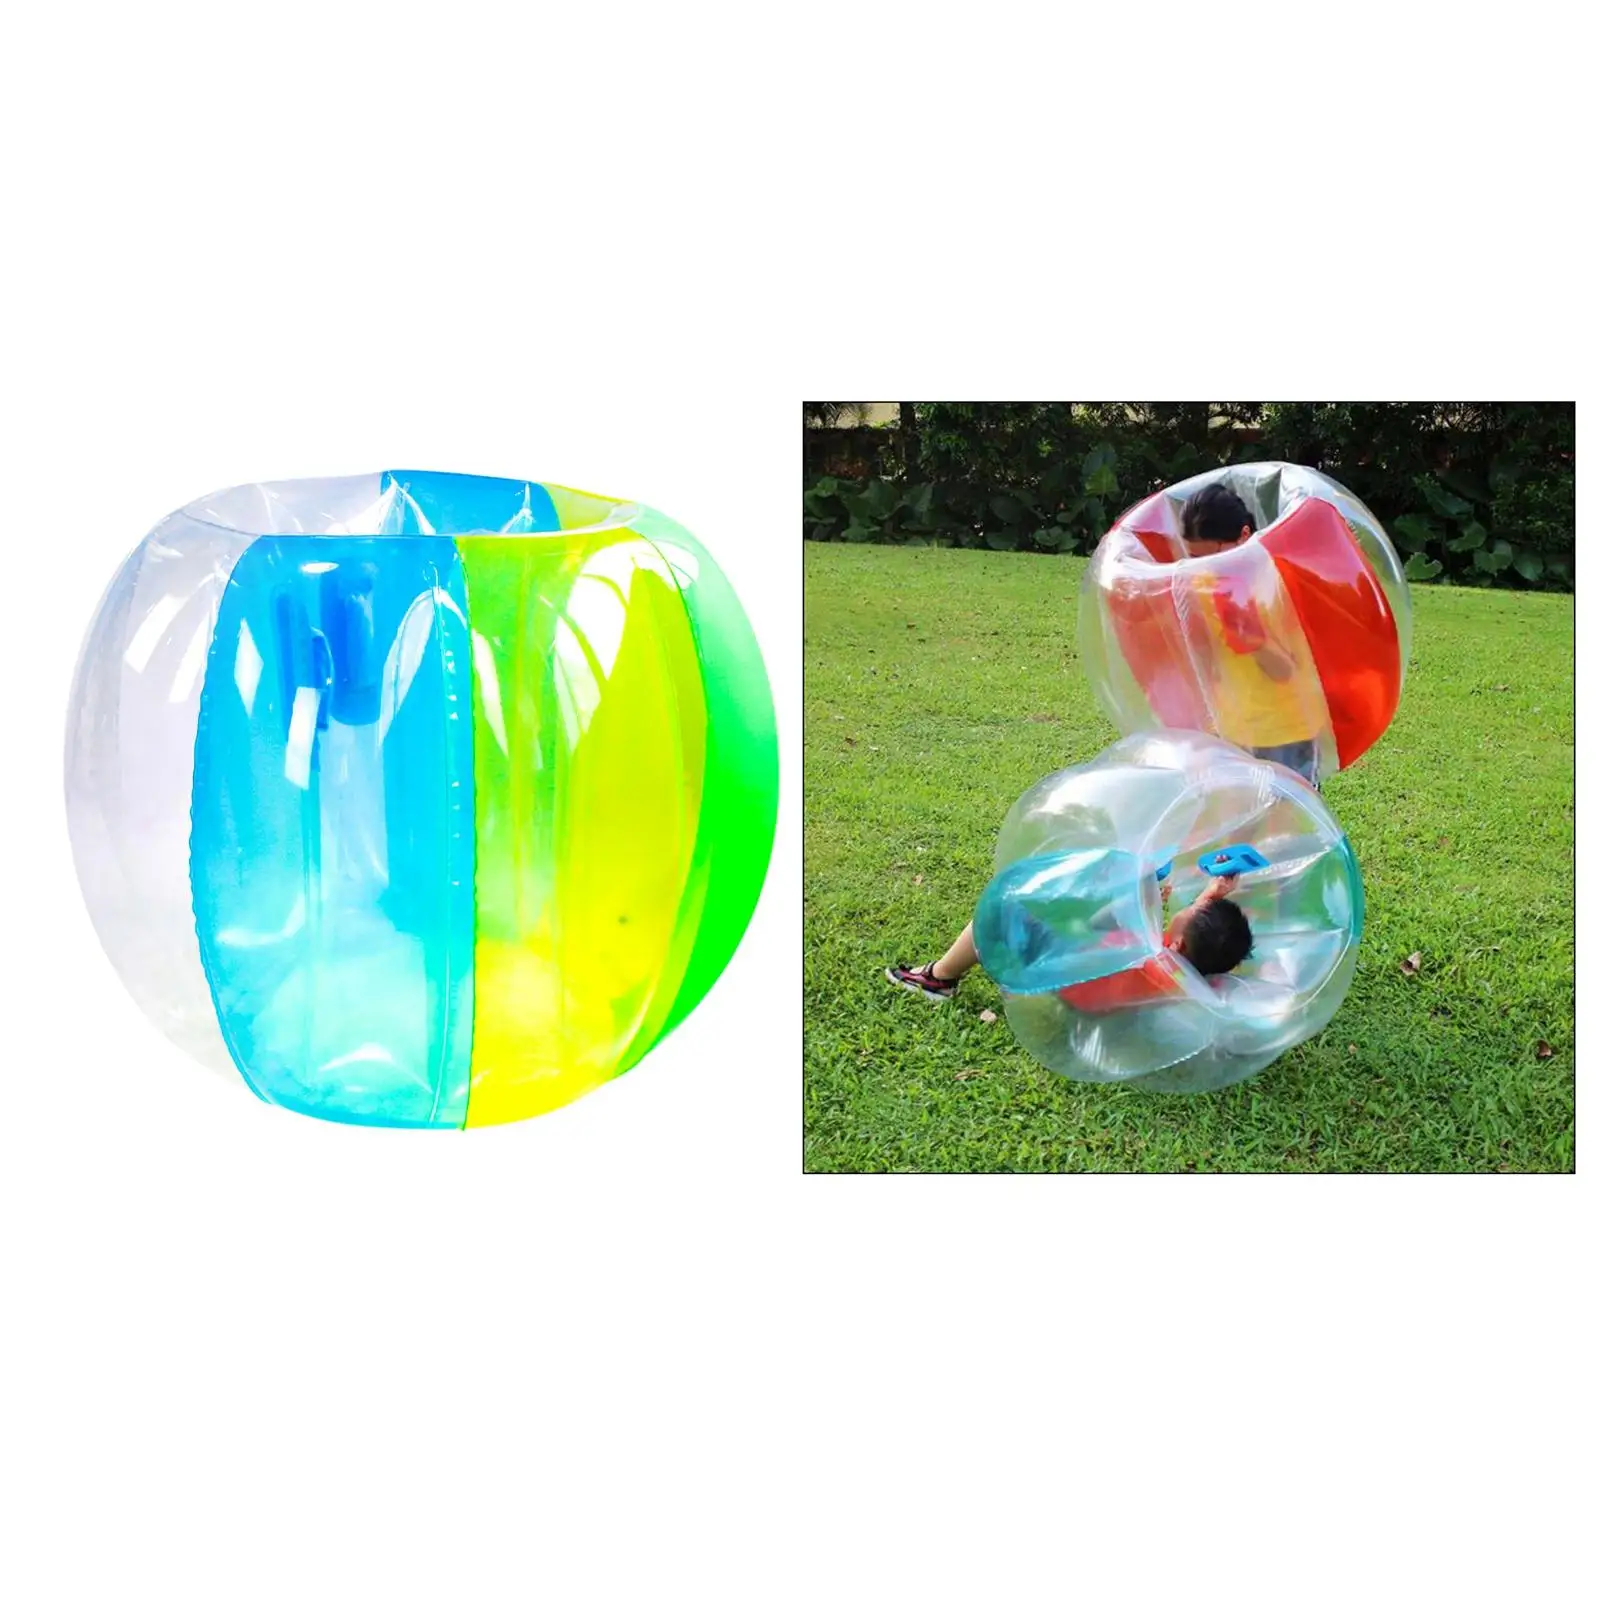 Bumper Balls for Adults, Inflatable  ball Sumo Bumper Toys, Kids Adult Sports Outdoor Games